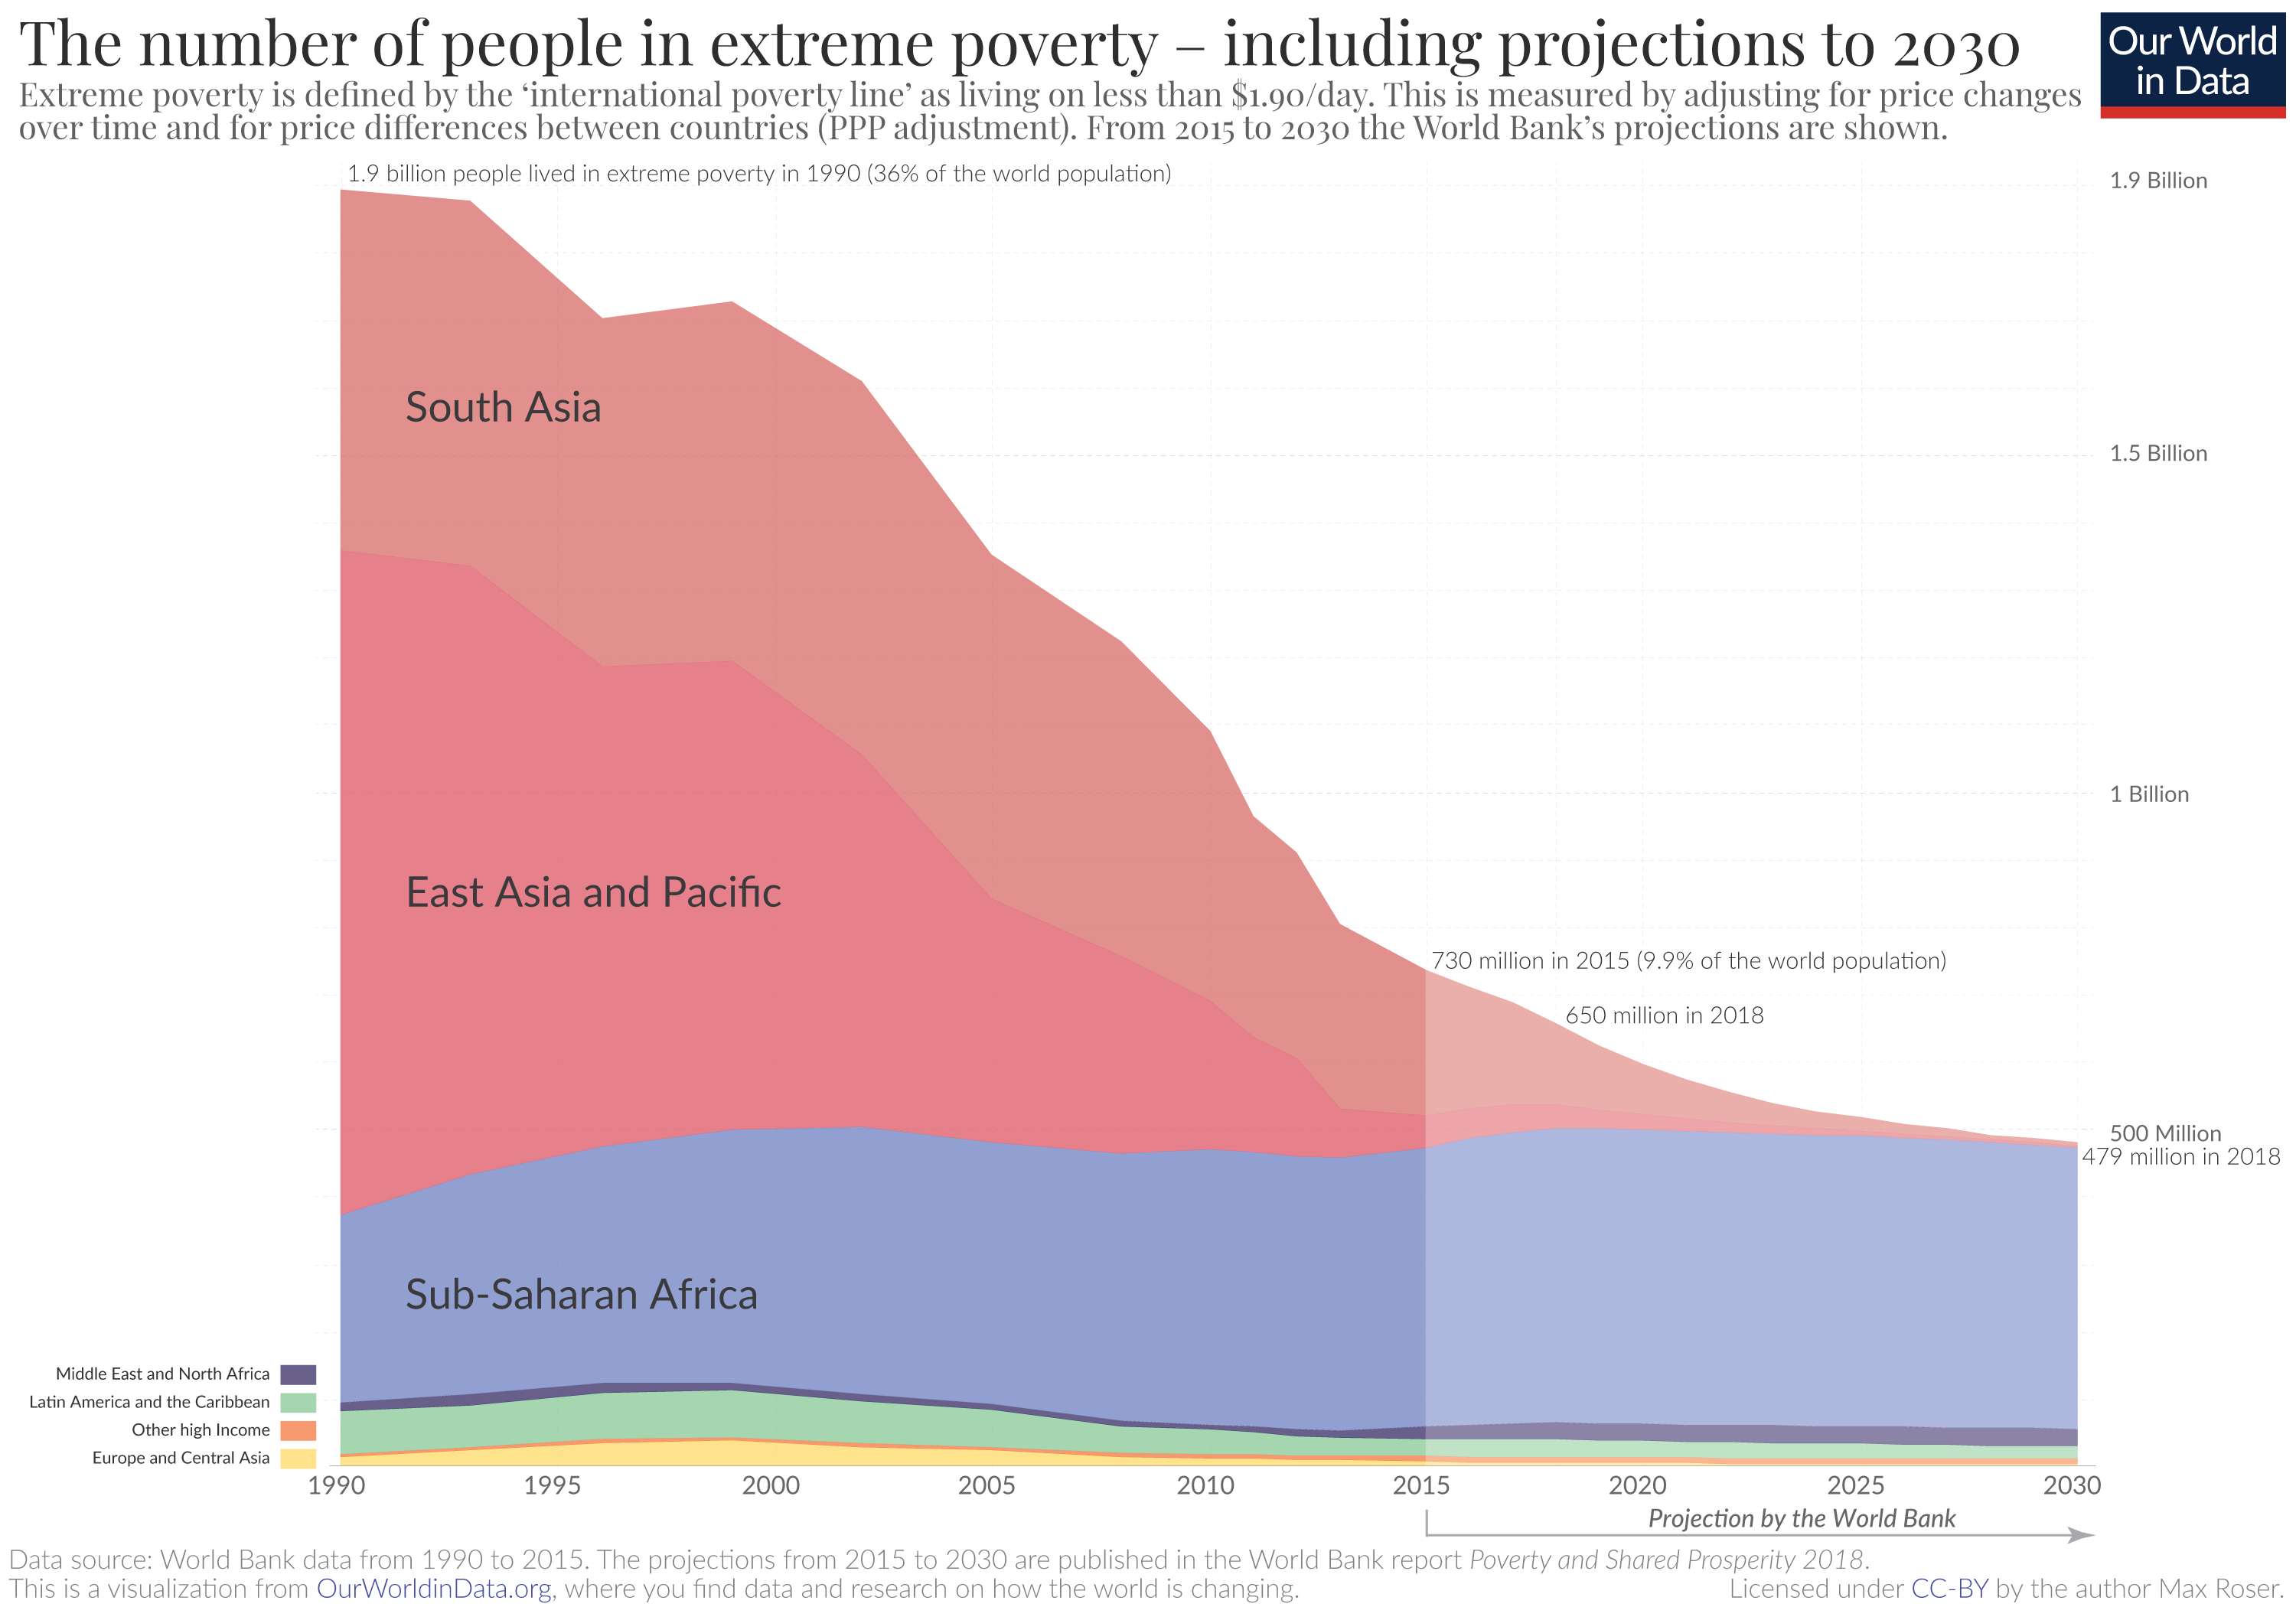 Good News for Today - According to the World Bank, the percentage of people living in extreme poverty is now at 8%, down from 10% in 2015 and the lowest level ever recorded.